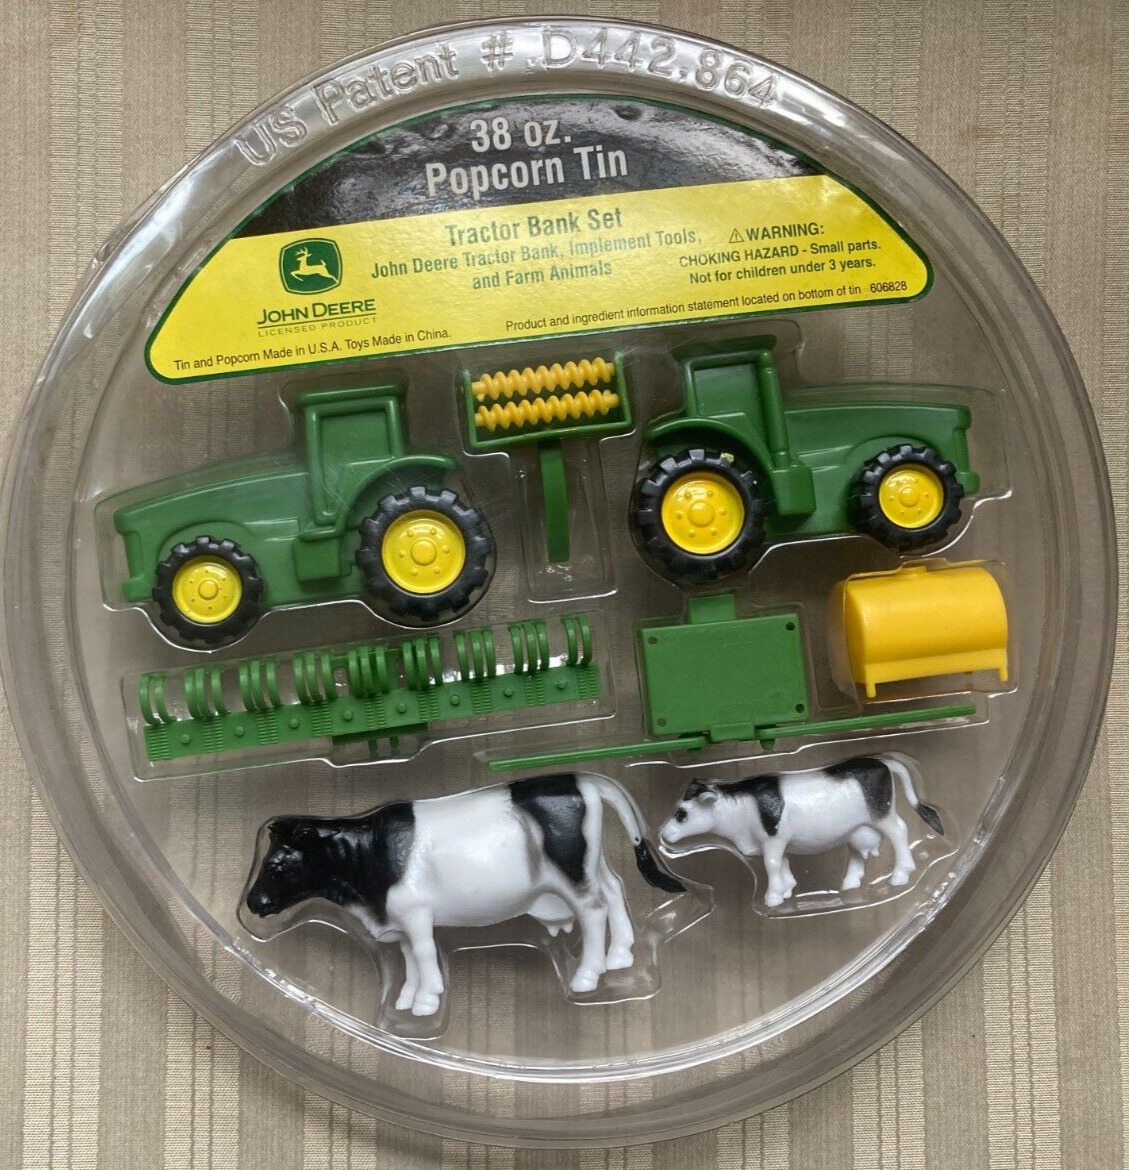 John Deere Popcorn Tin Tractor Bank Set with Implement Tools & Cow Farm Animals